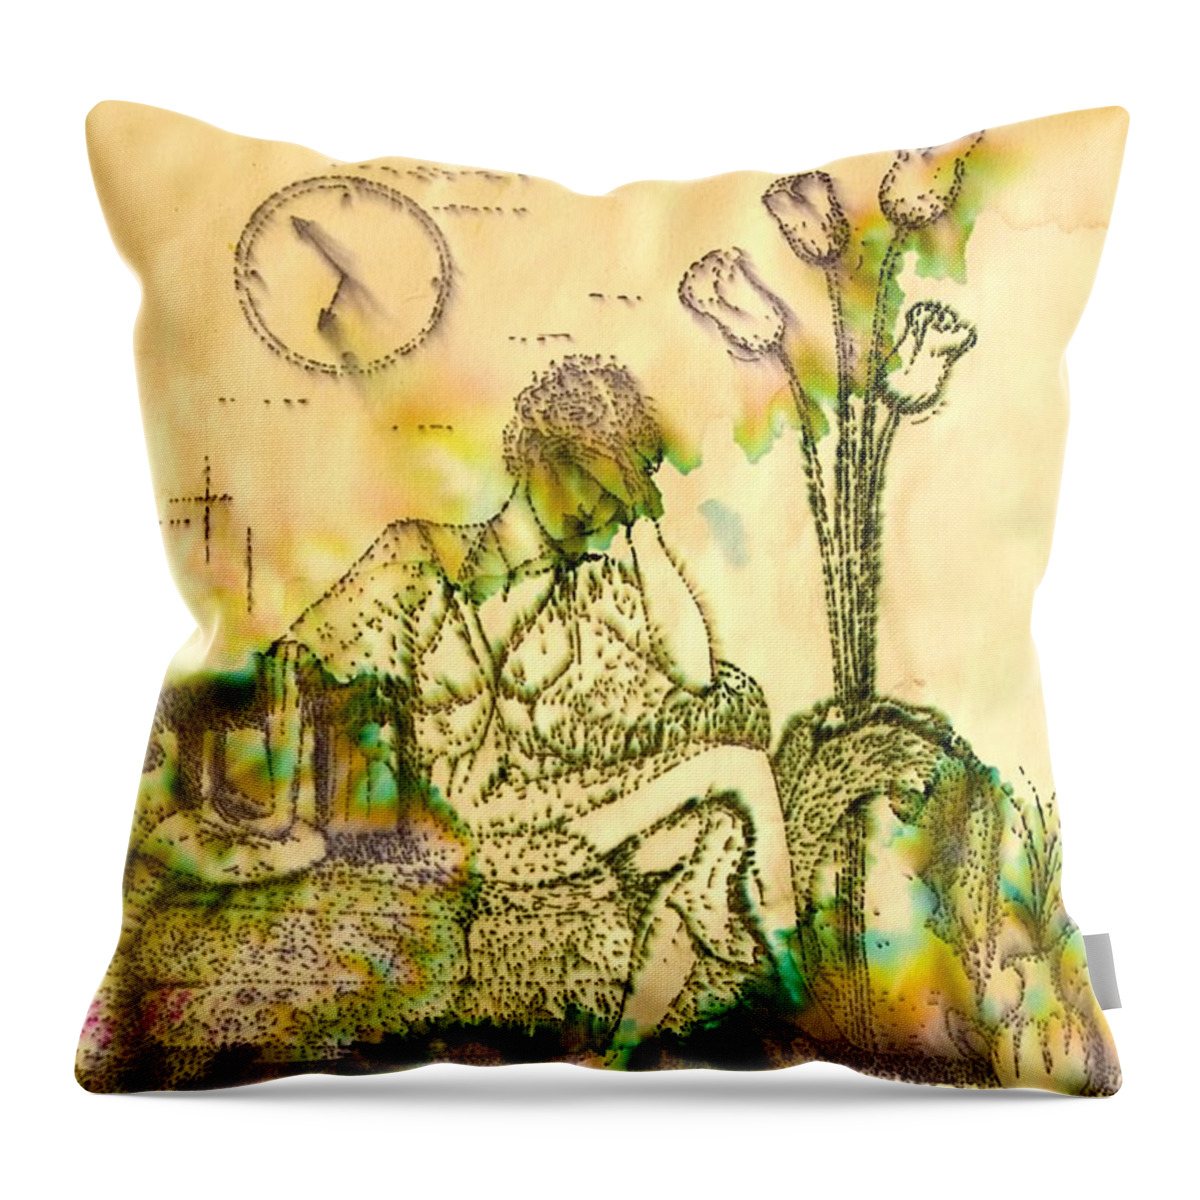 Woman Throw Pillow featuring the drawing The Hold Up sepia tone by Angelique Bowman